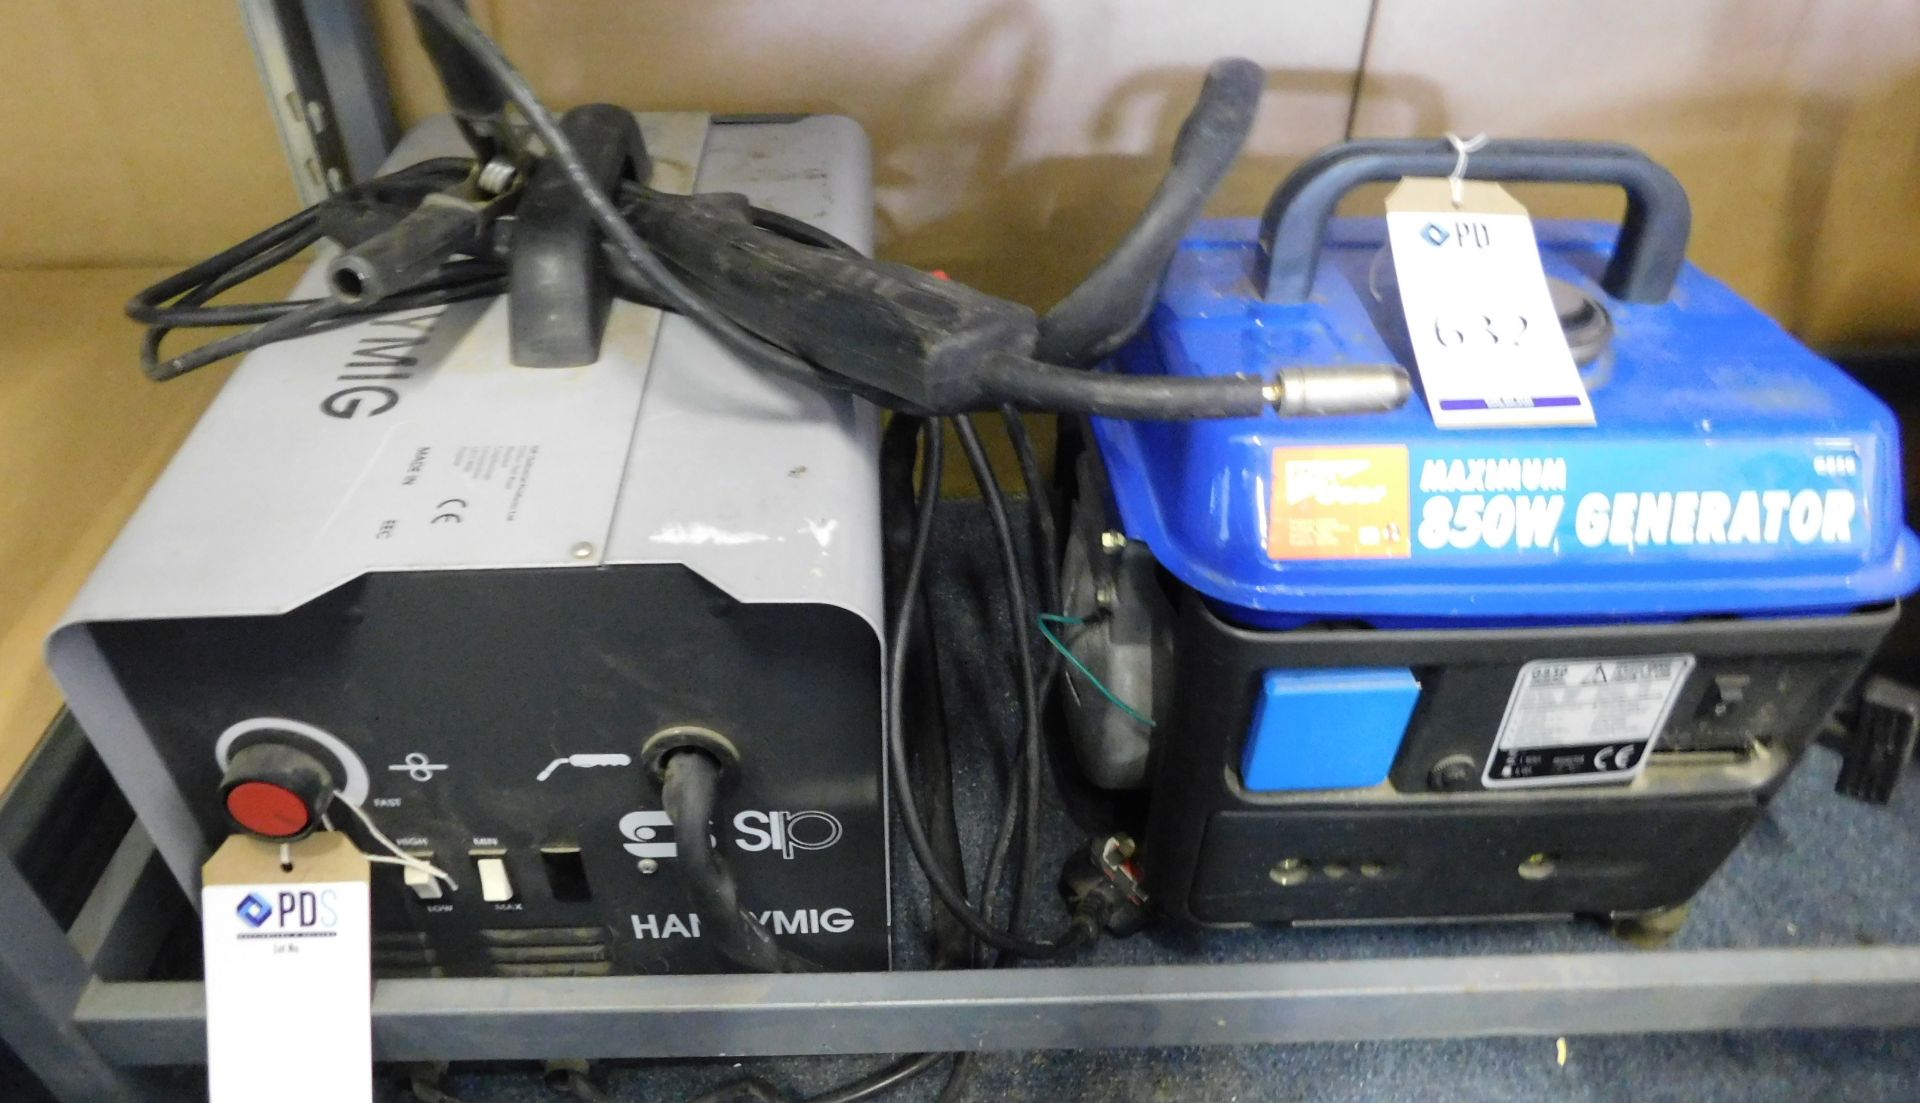 SIP Handymig Welder & 850W Generator (Location: Stockport. Please Refer to General Notes)